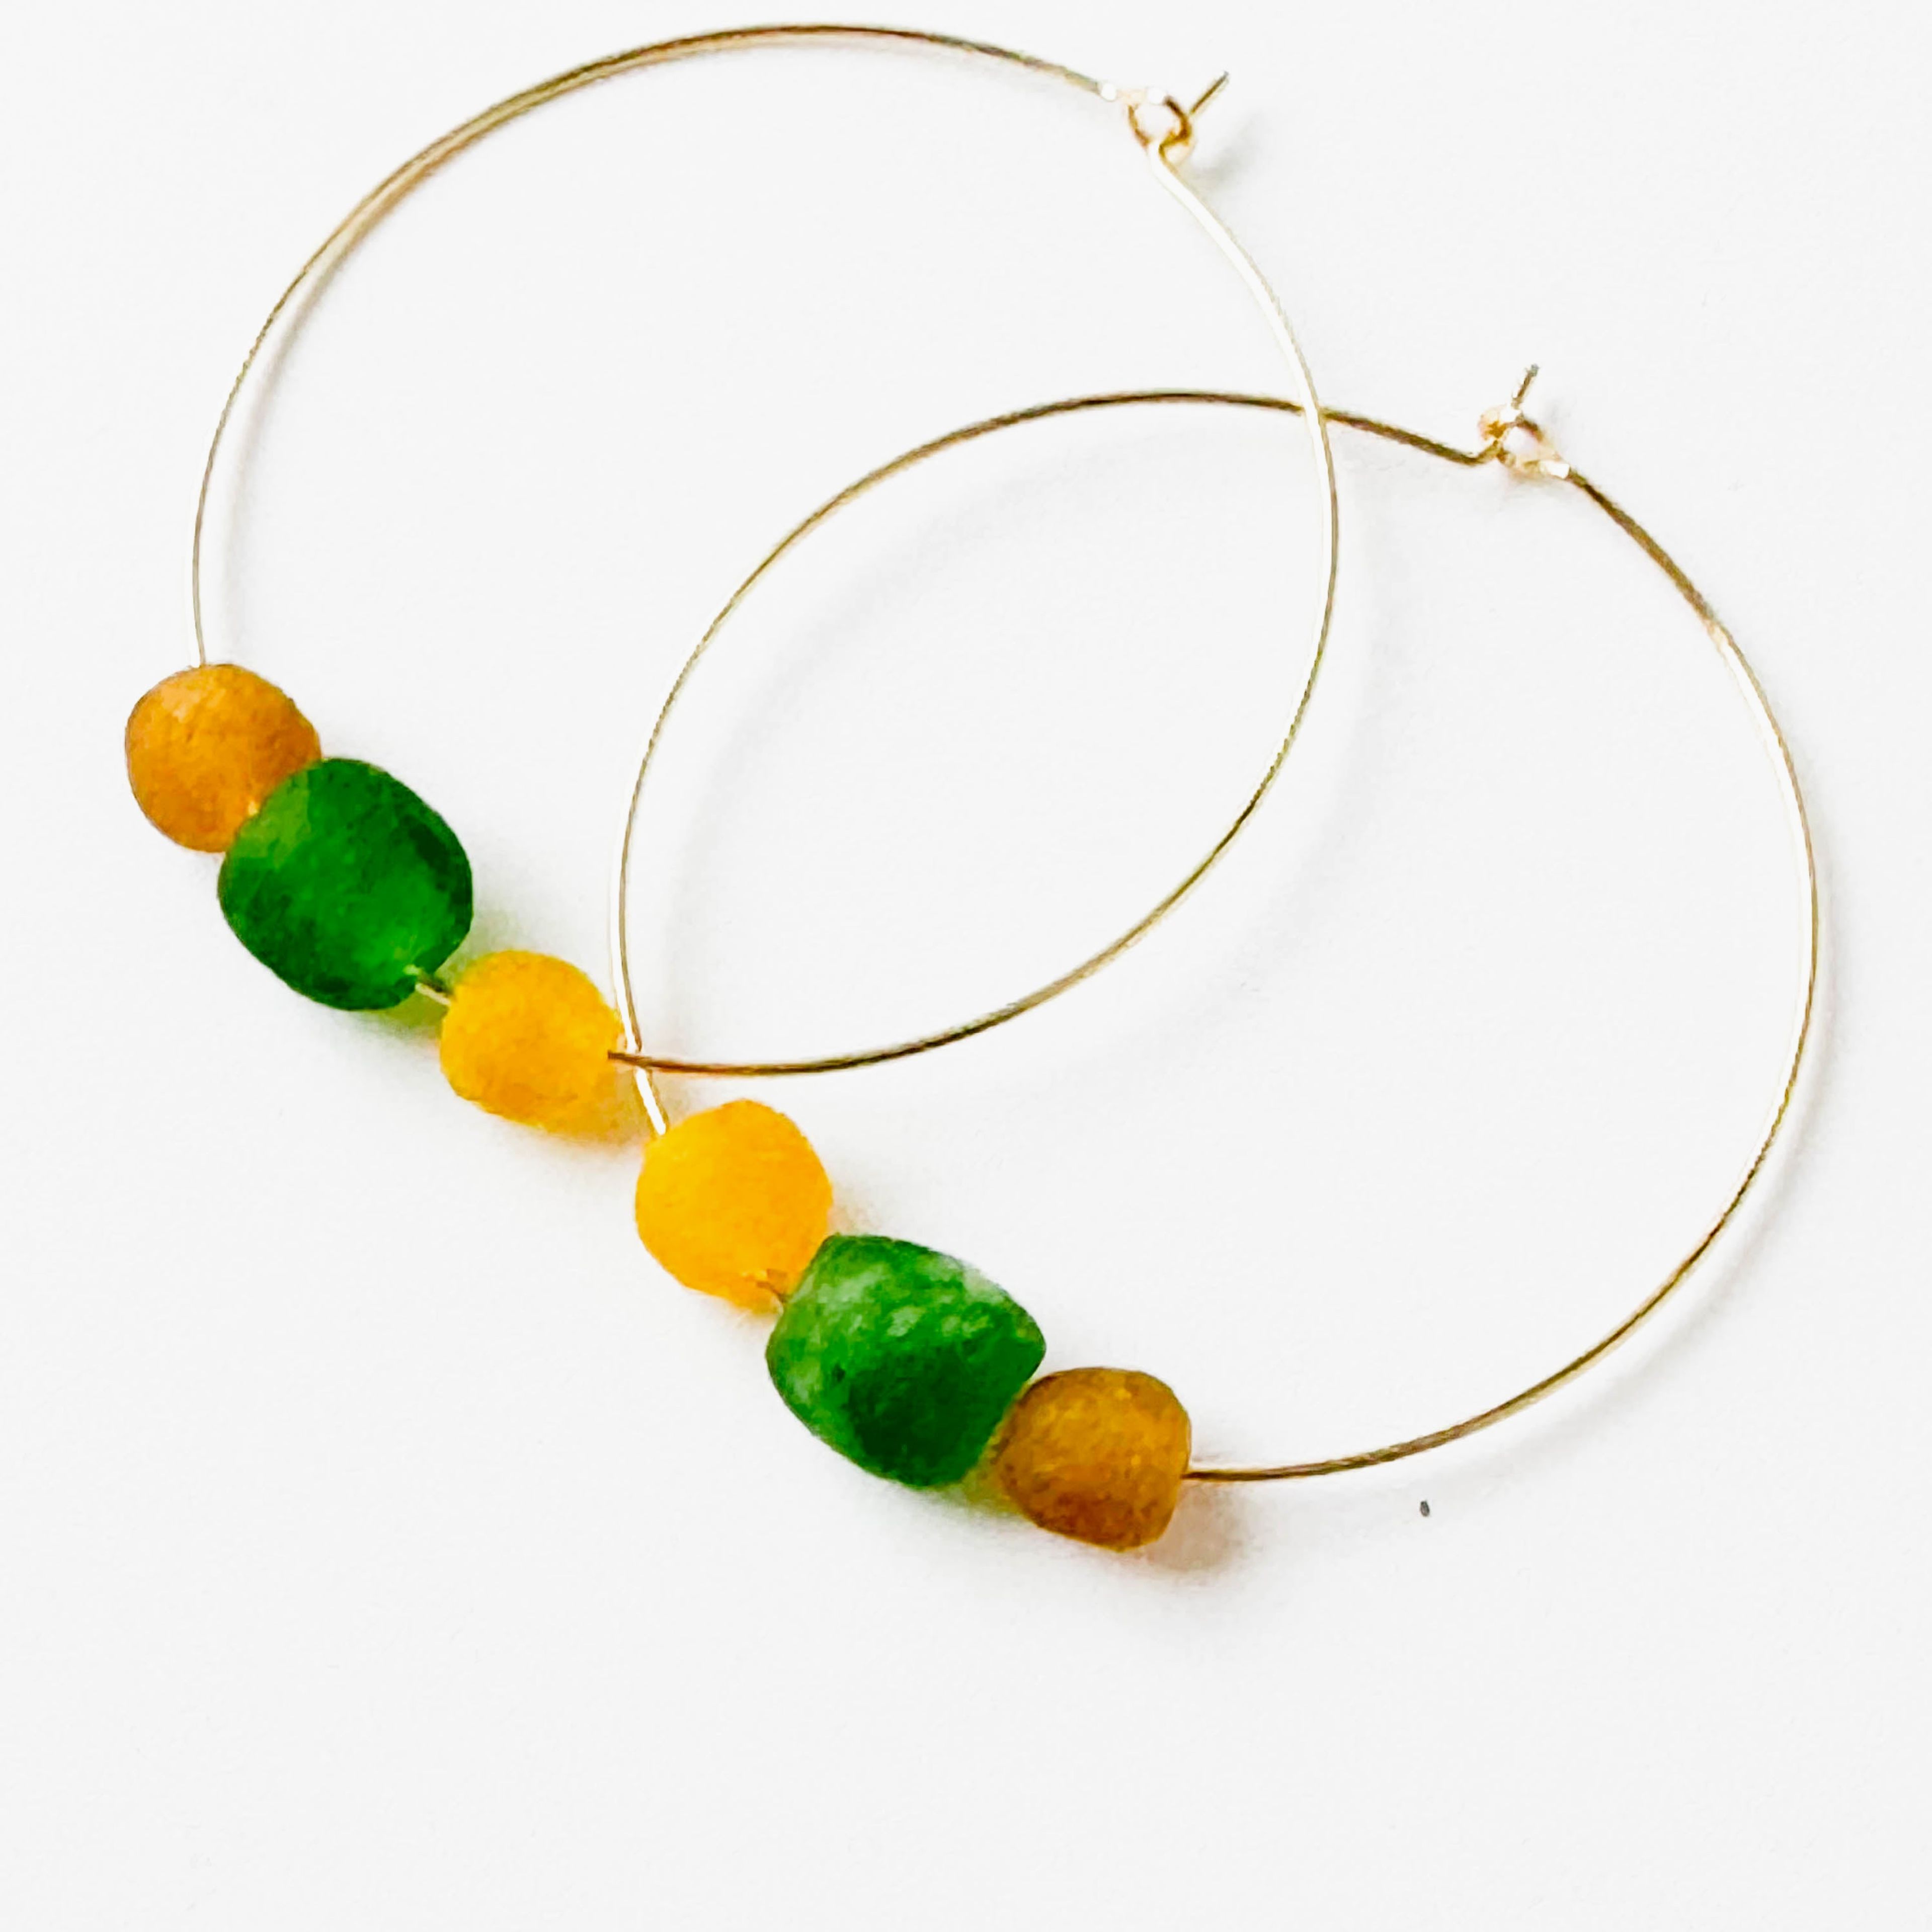 Big Hoops with Three Recycled Glass Beads